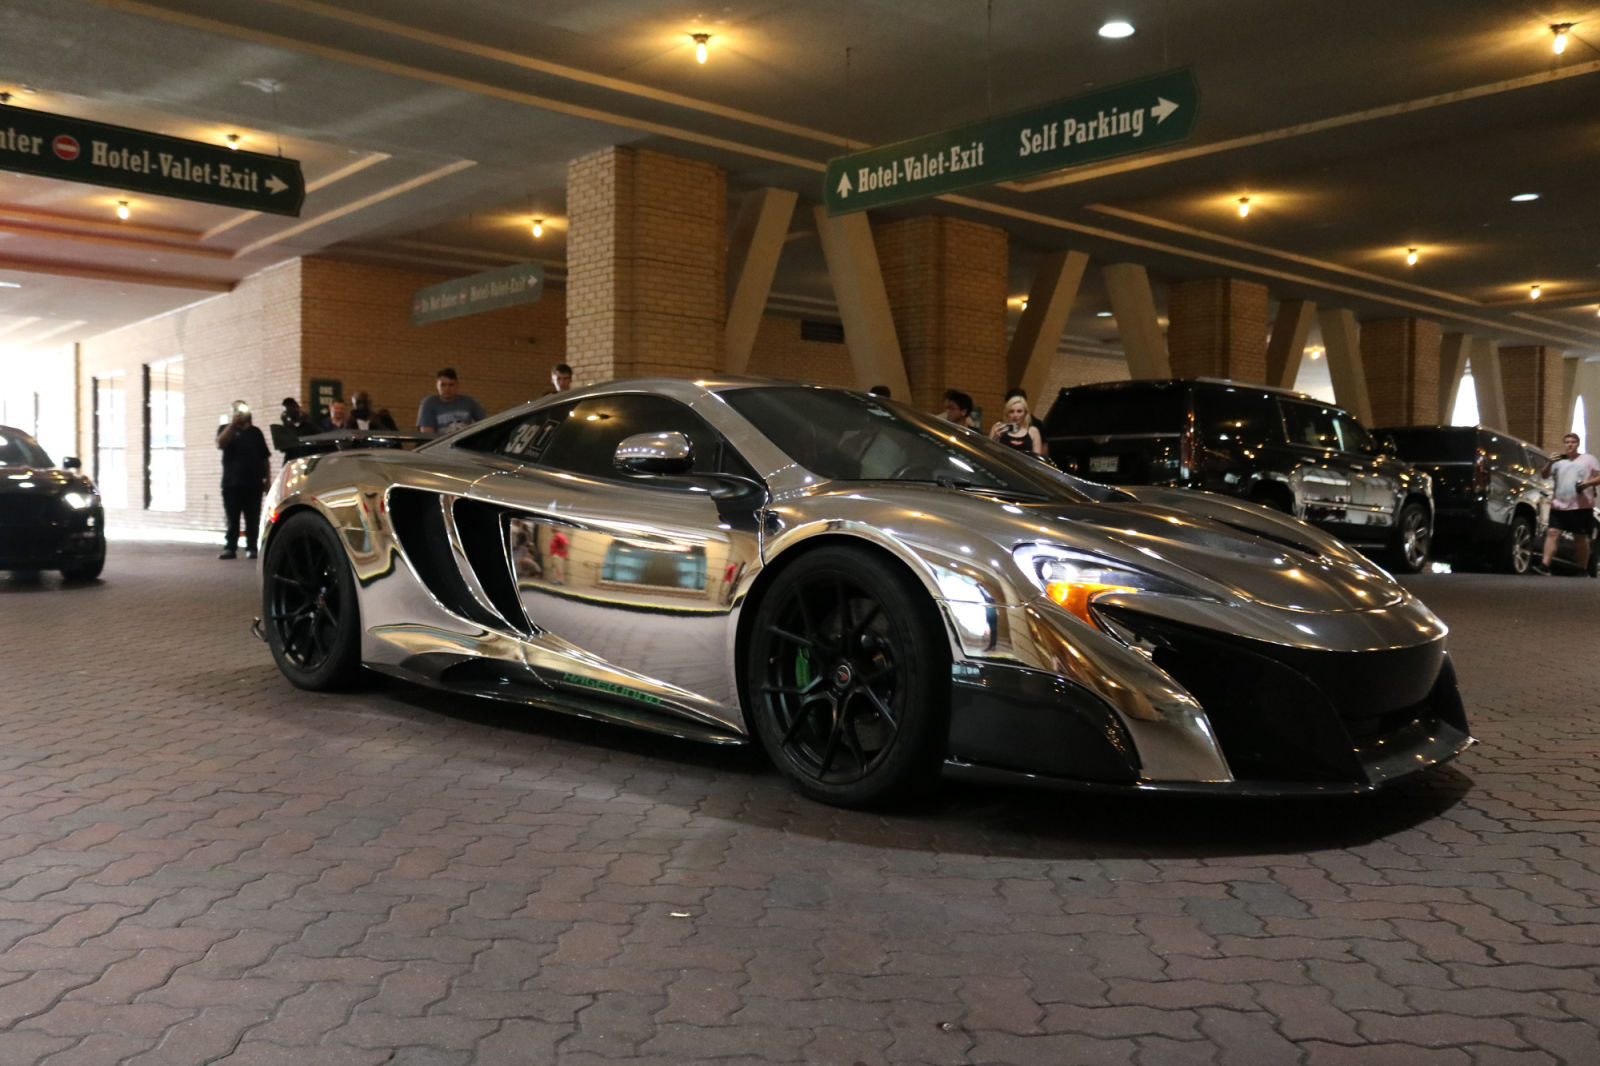 675LT tinkered with by Hypercar Development